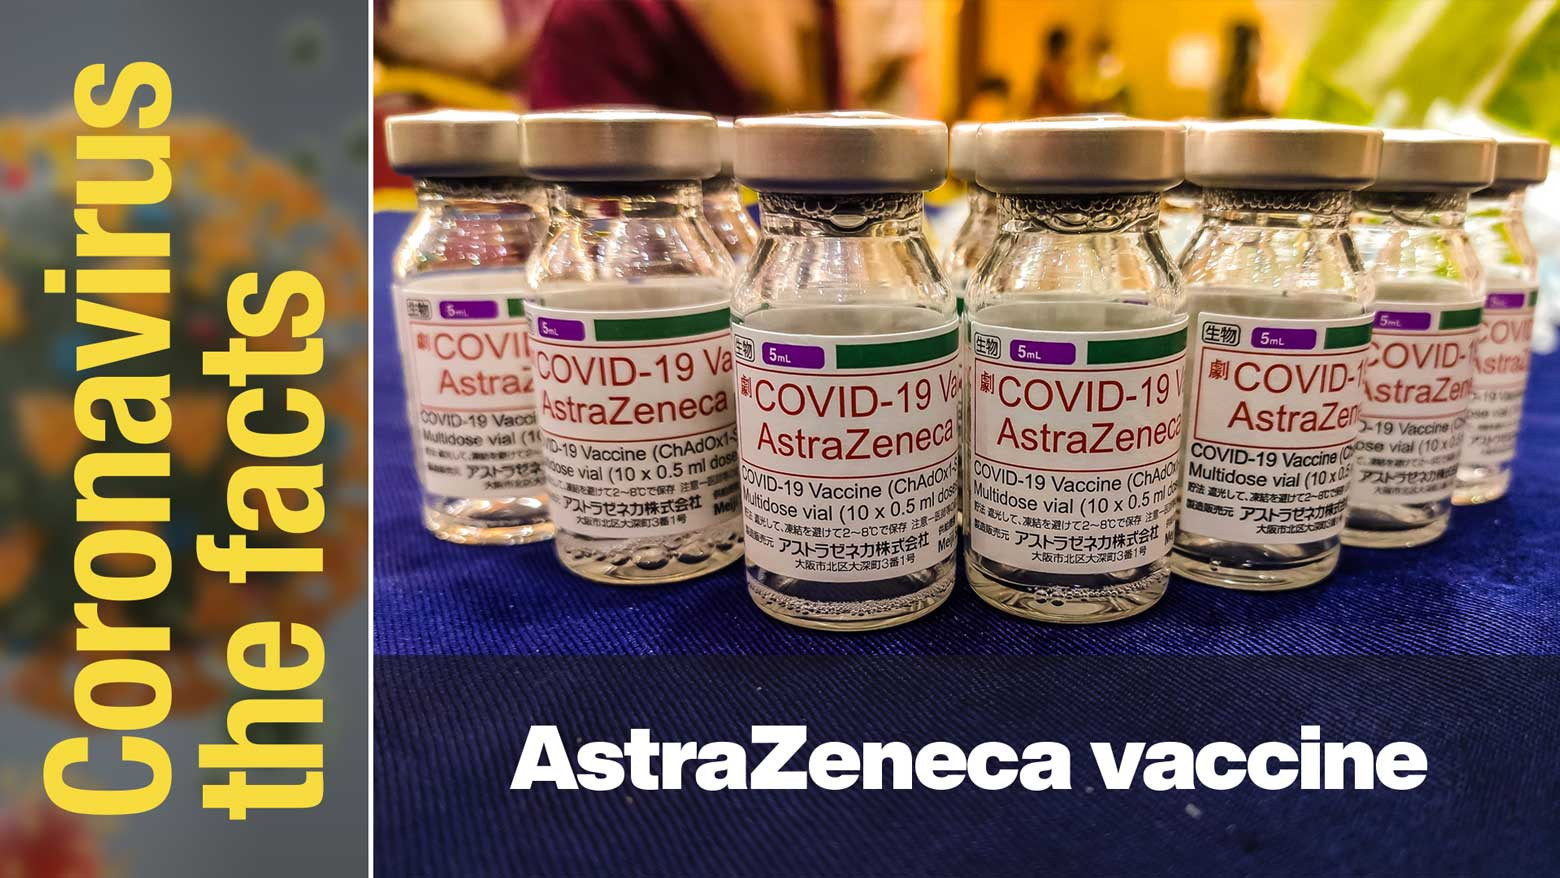 AstraZeneca vaccine now offered in Japan to people aged 40 or older